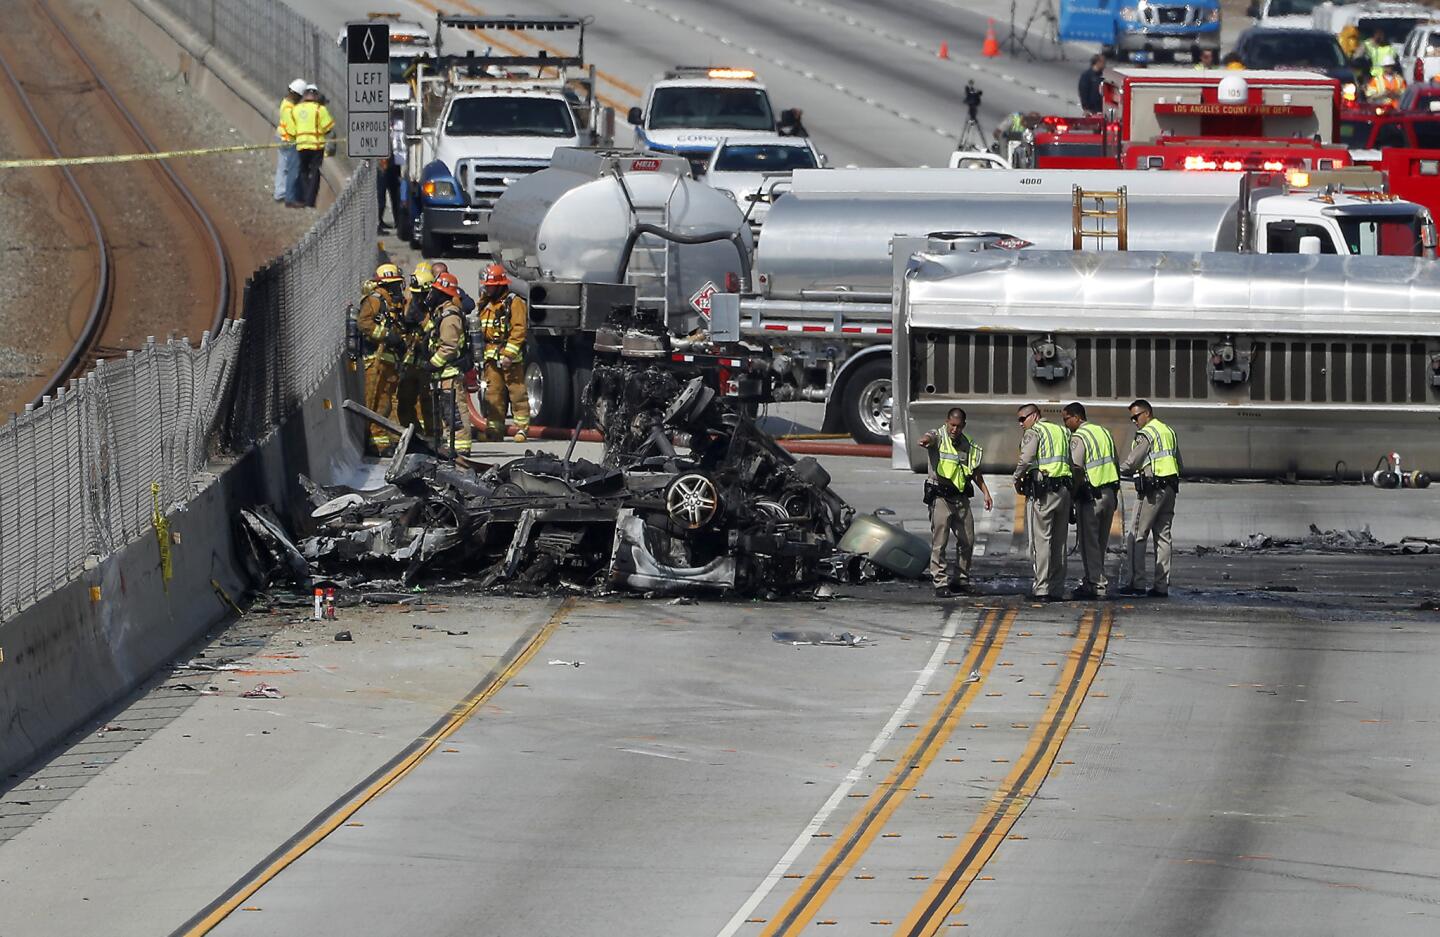 Los Angeles County Firefighters and CHP officers at the scene of a deadly accident involving a tanker truck and a Range Rover on the westbound 105 Freeway near Prairie Ave. in Hawthorne.